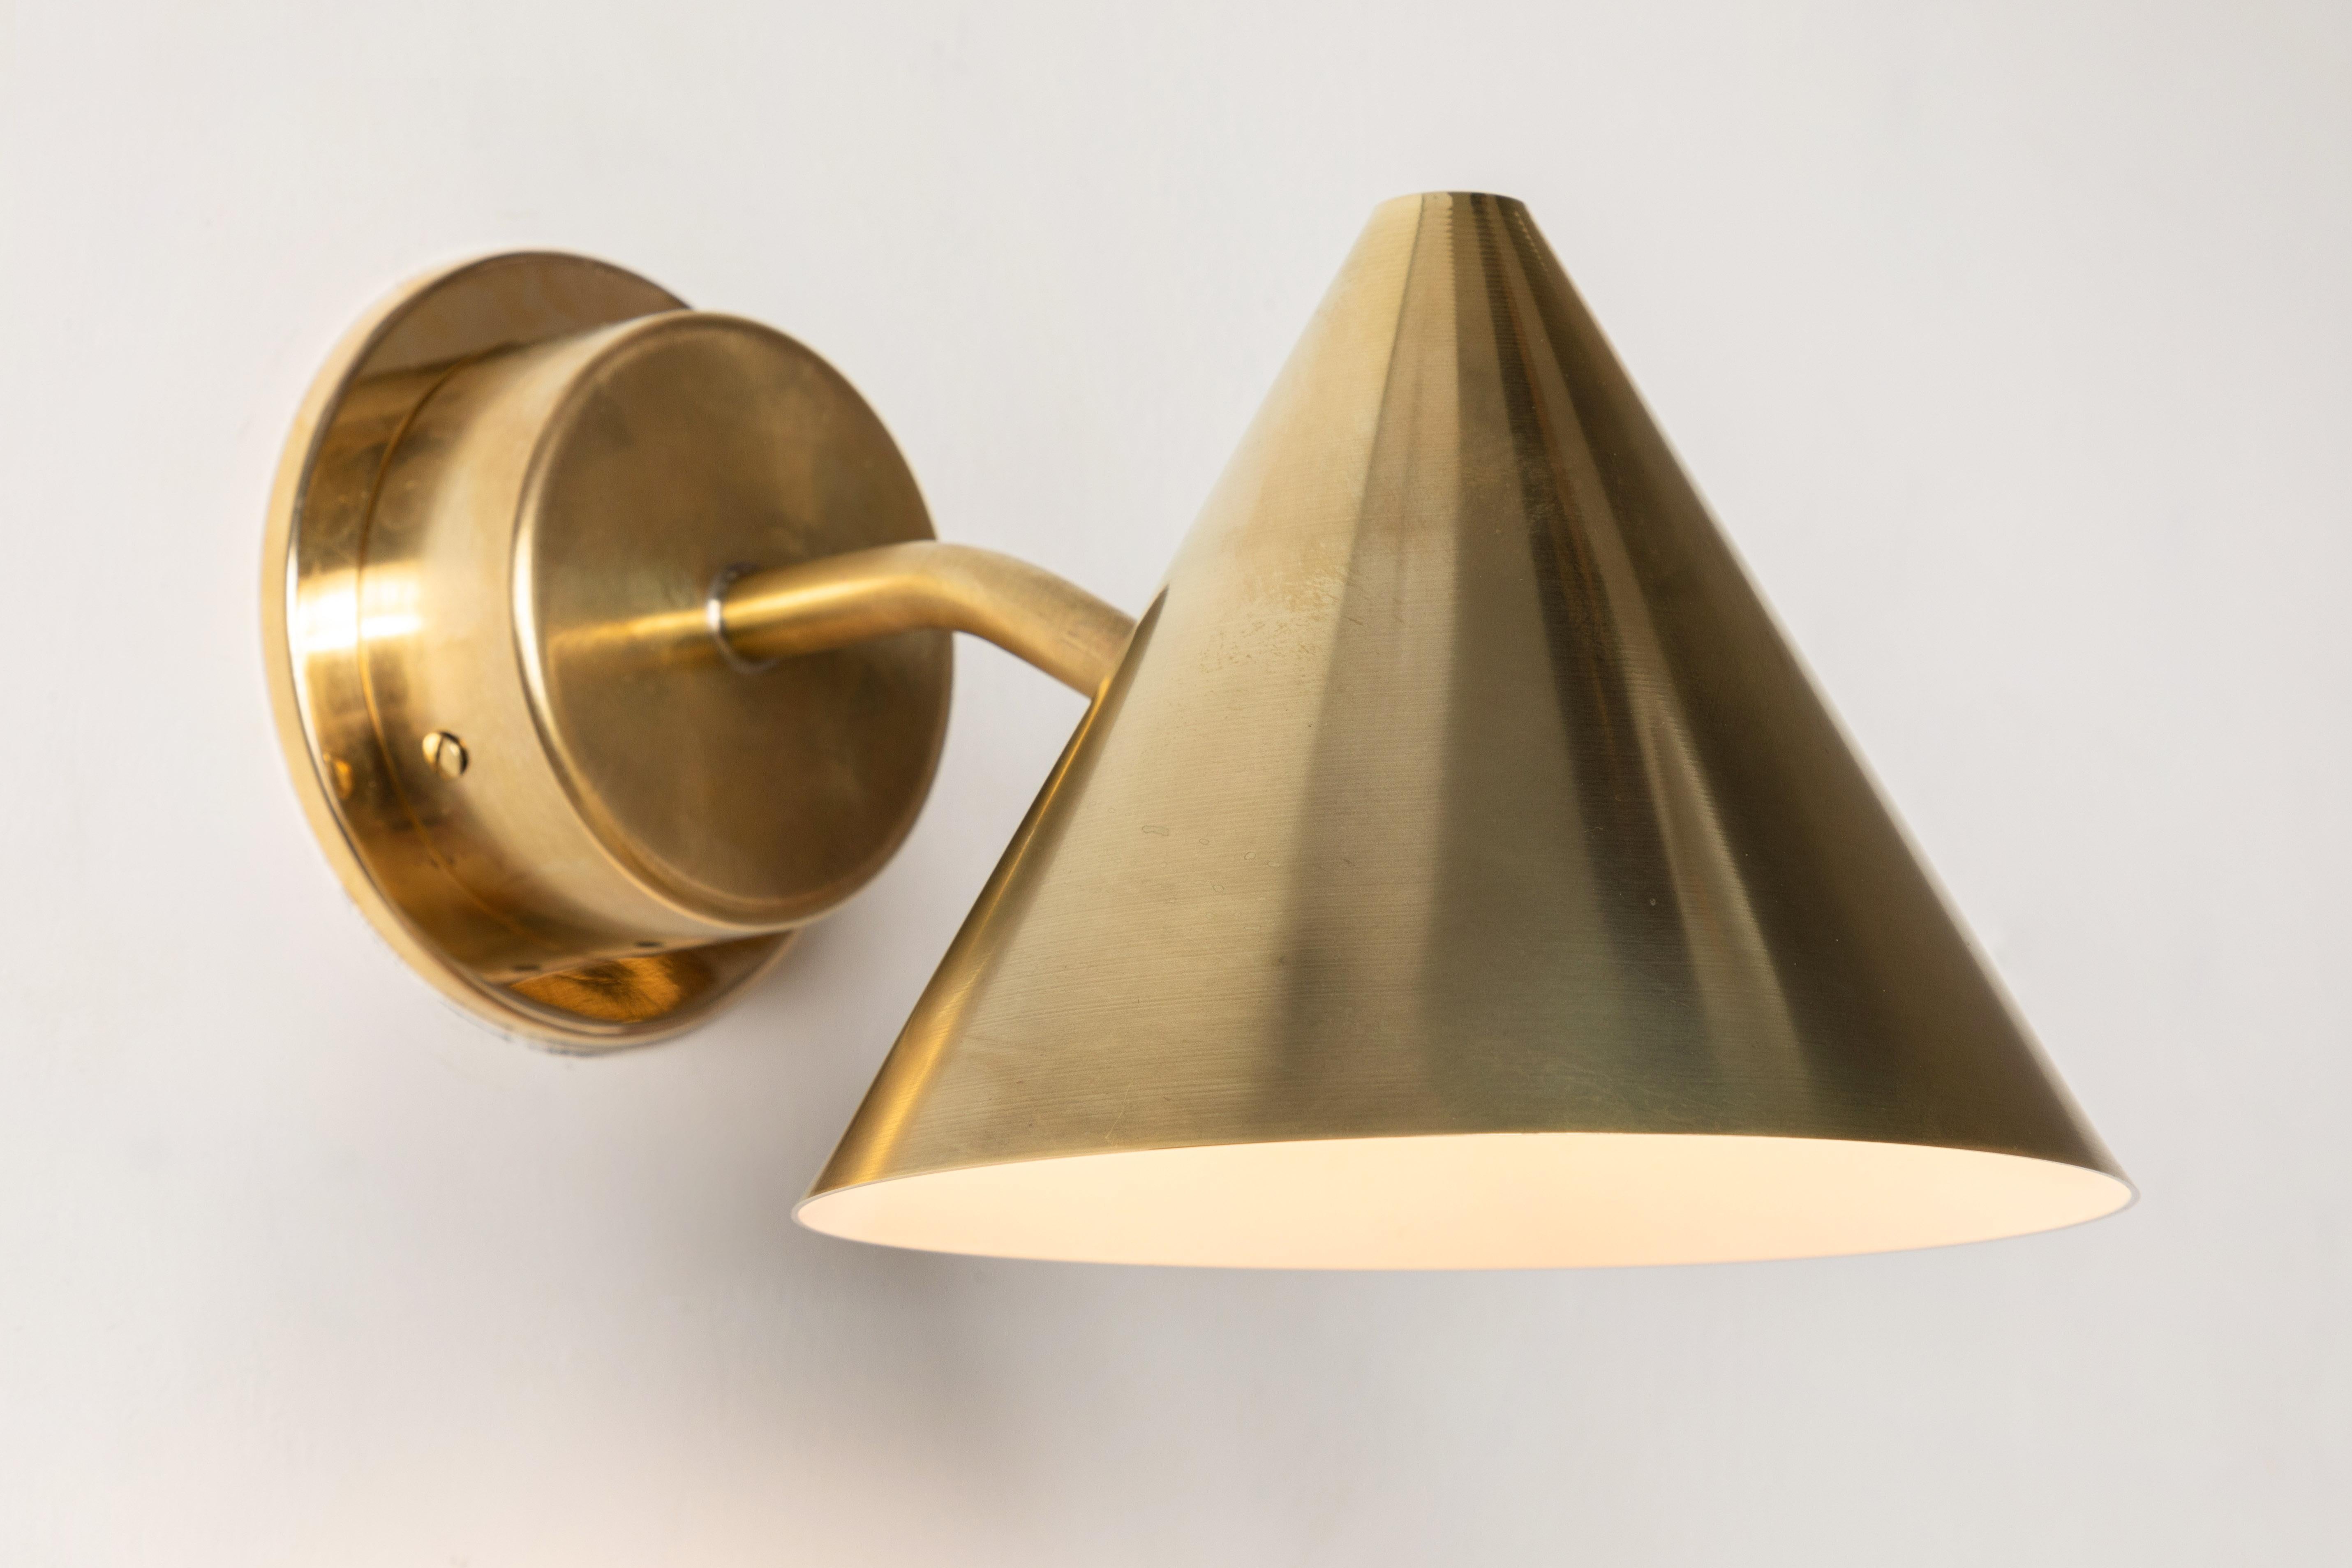 Pair of Hans-Agne Jakobsson 'Mini-Tratten' Raw Brass outdoor sconces. 

An exclusive made for U.S. and UL listed authorized re-edition of the classic Swedish design executed in raw brass with white painted interior. An incredibly refined design that